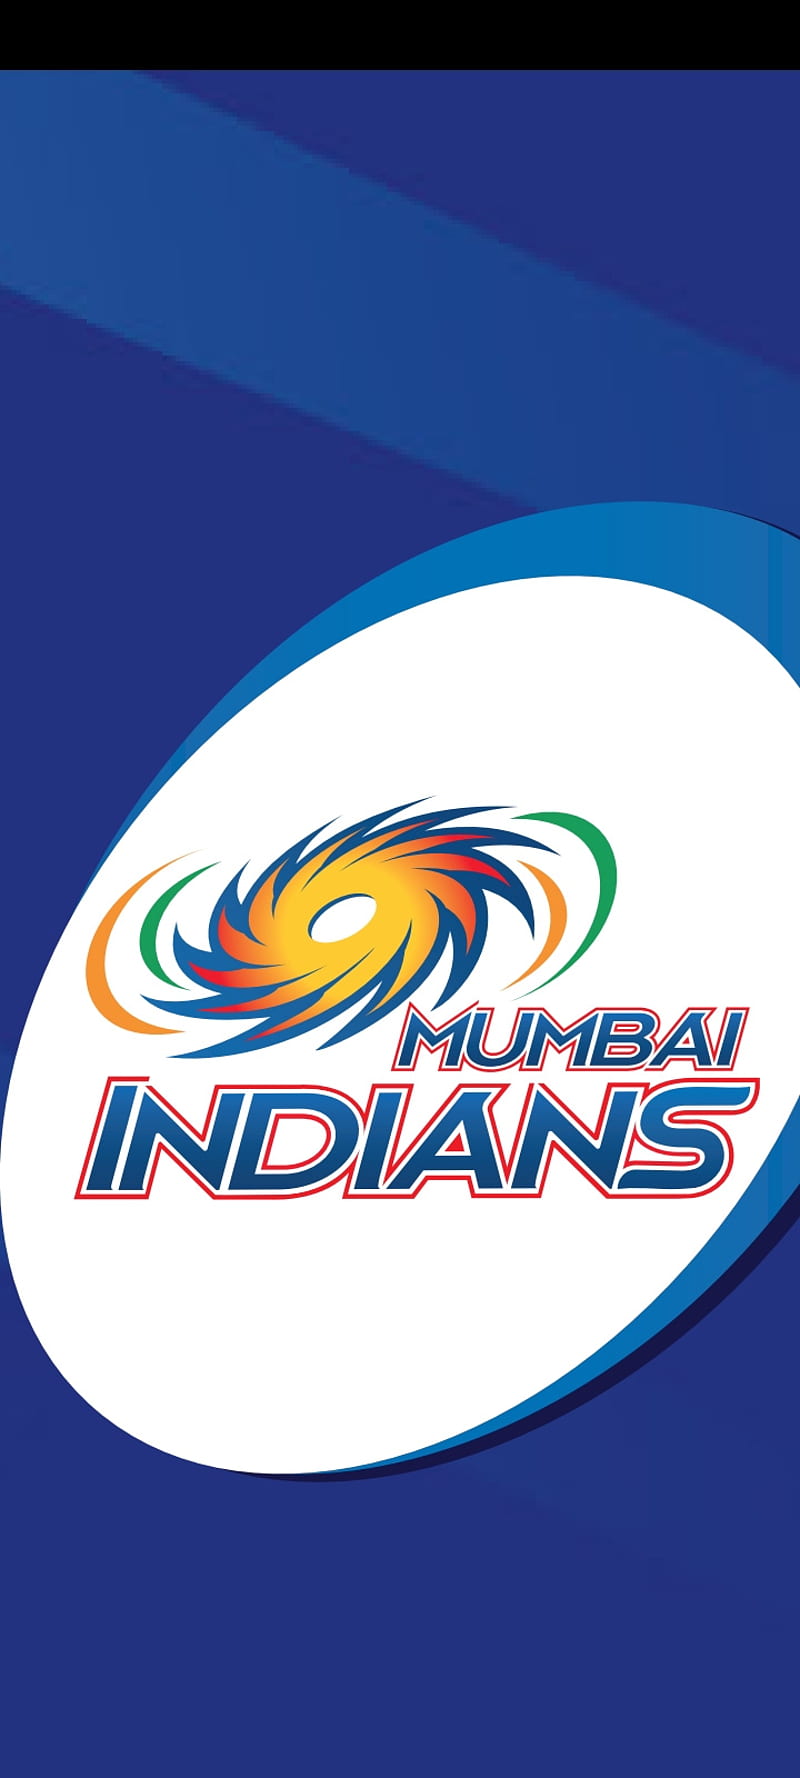 Mumbai Indians Flag: The pride of the 5-time IPL Champions - India Fantasy-cheohanoi.vn